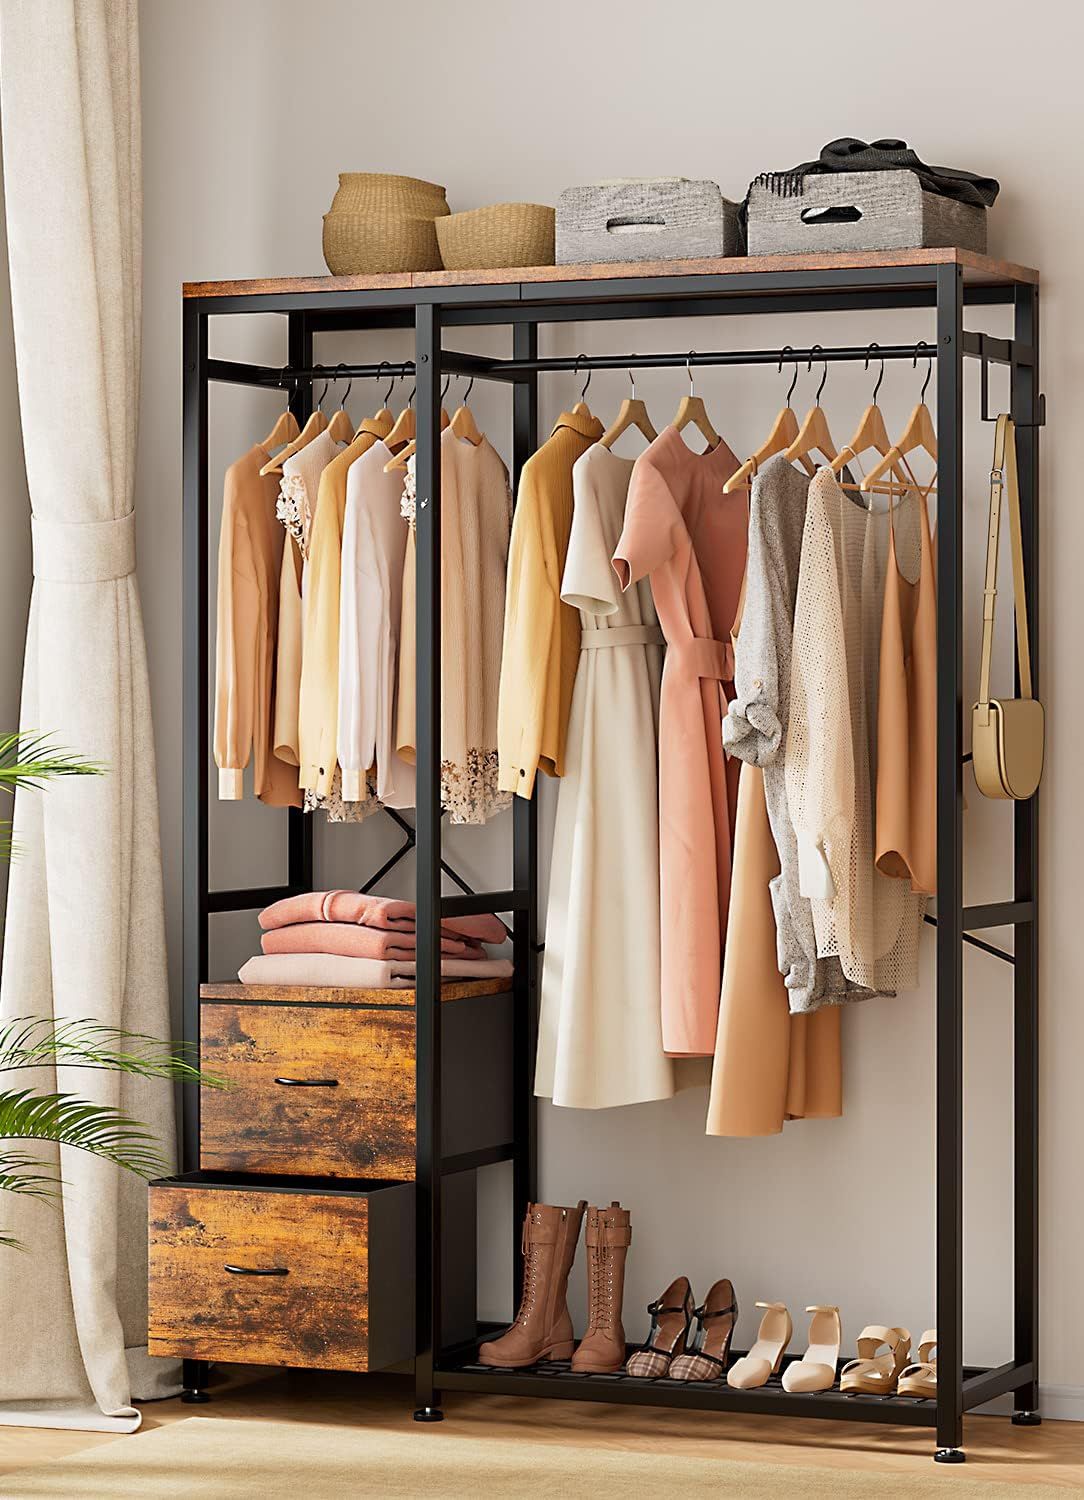 Maximize Your Space with the Perfect Clothing Storage Rack